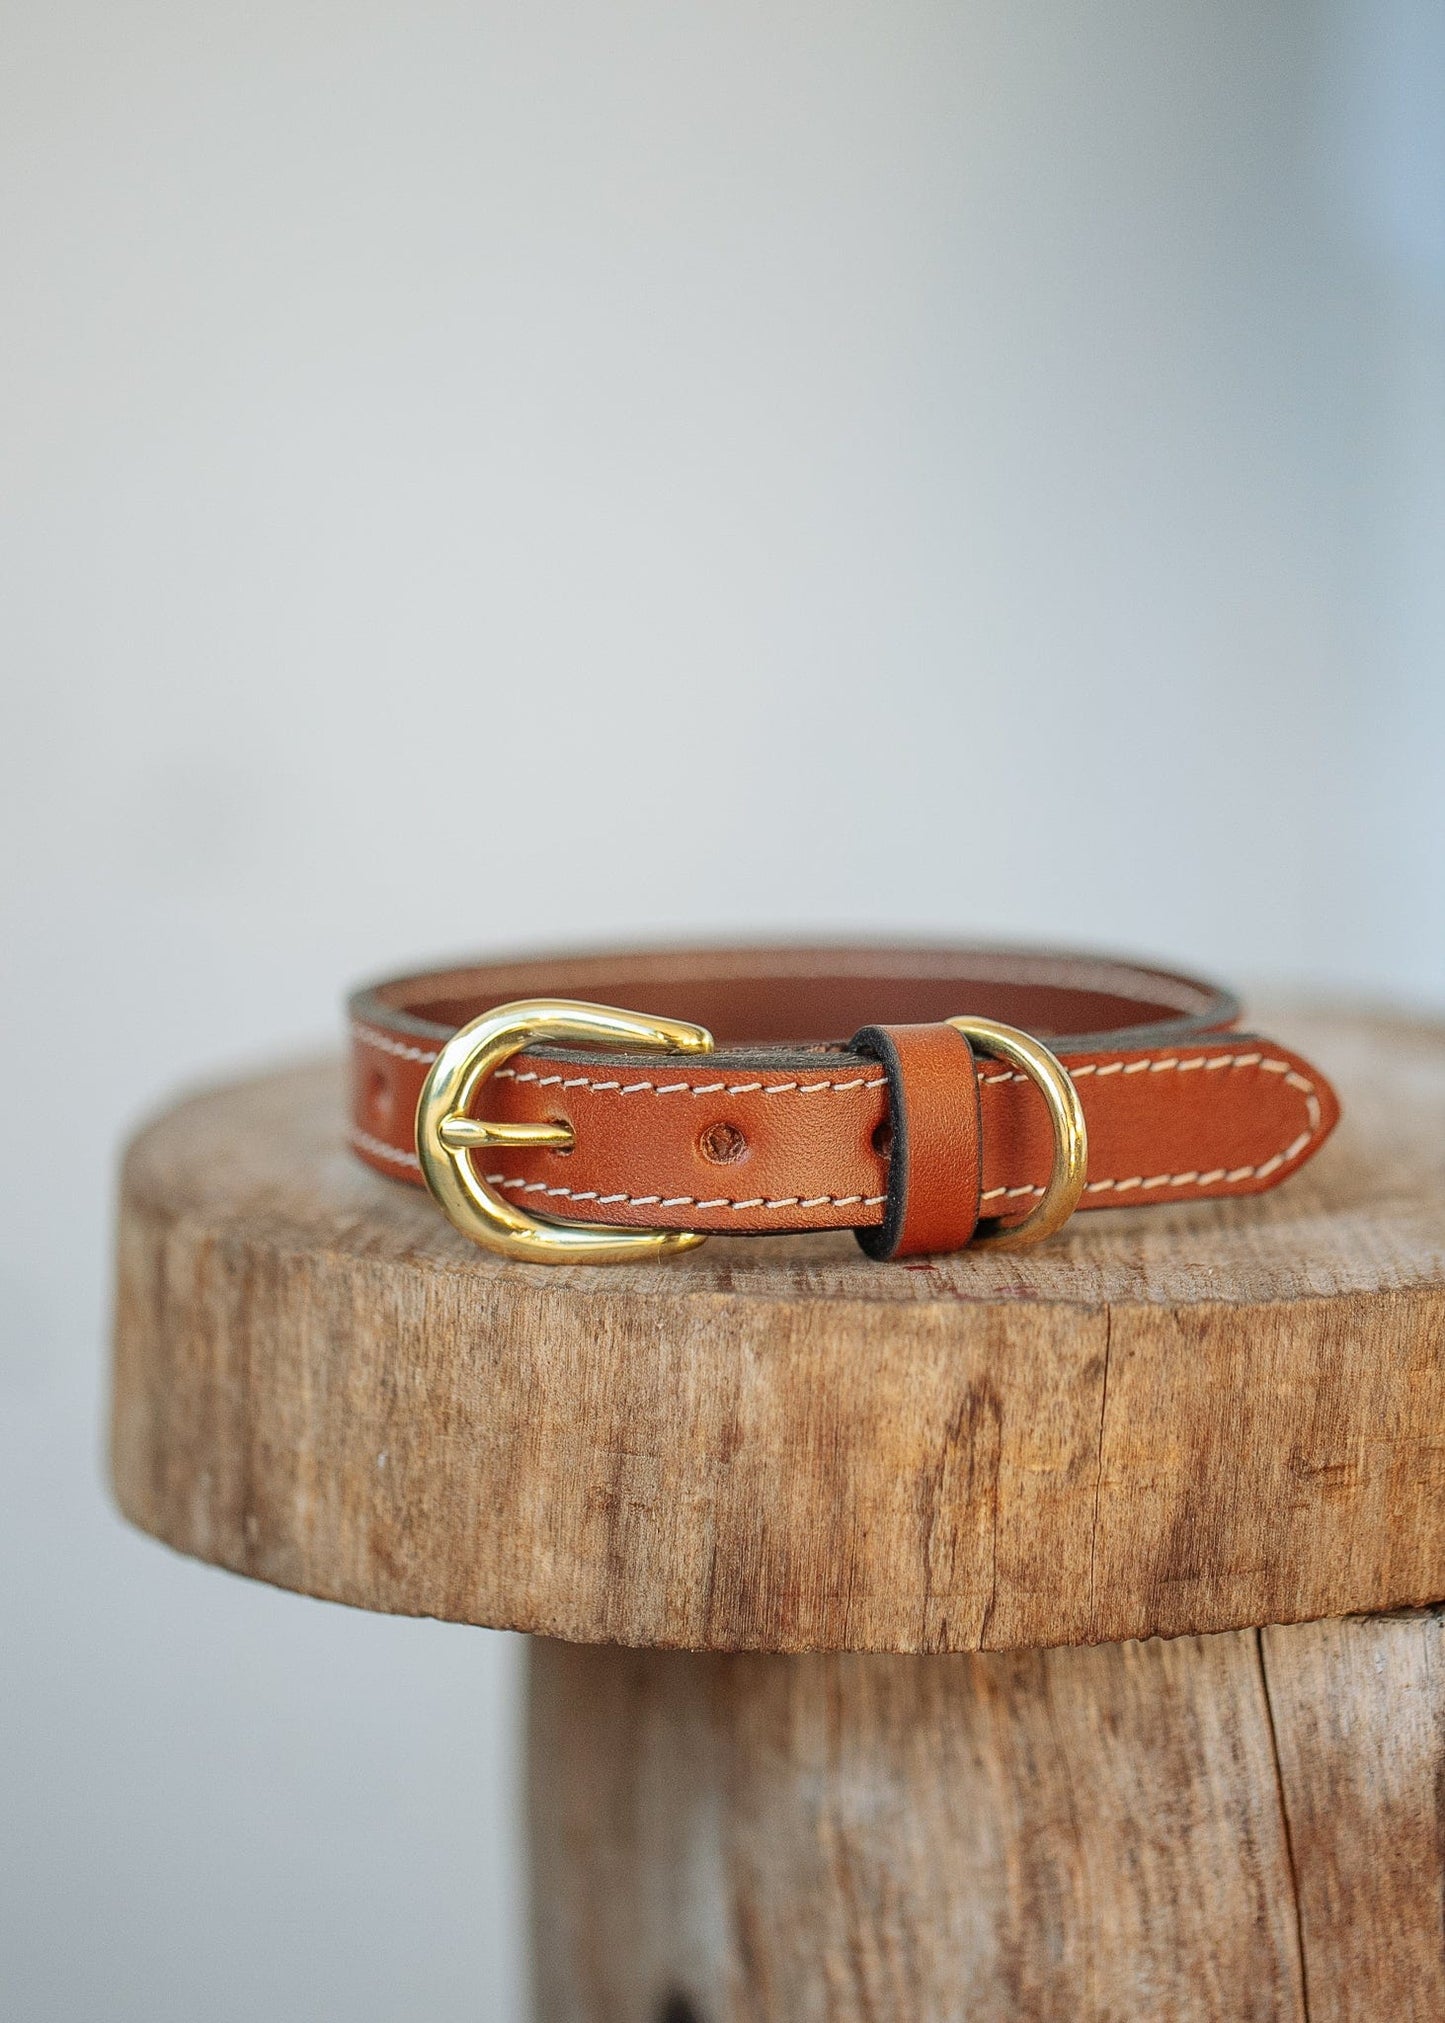 The Real McCaul Leathergoods Pet Collars & Harnesses Rancher Dog Collar - 20mm - Tan Australian Made Australian Owned Australian Made Dog Collar - Solid Leather with Brass